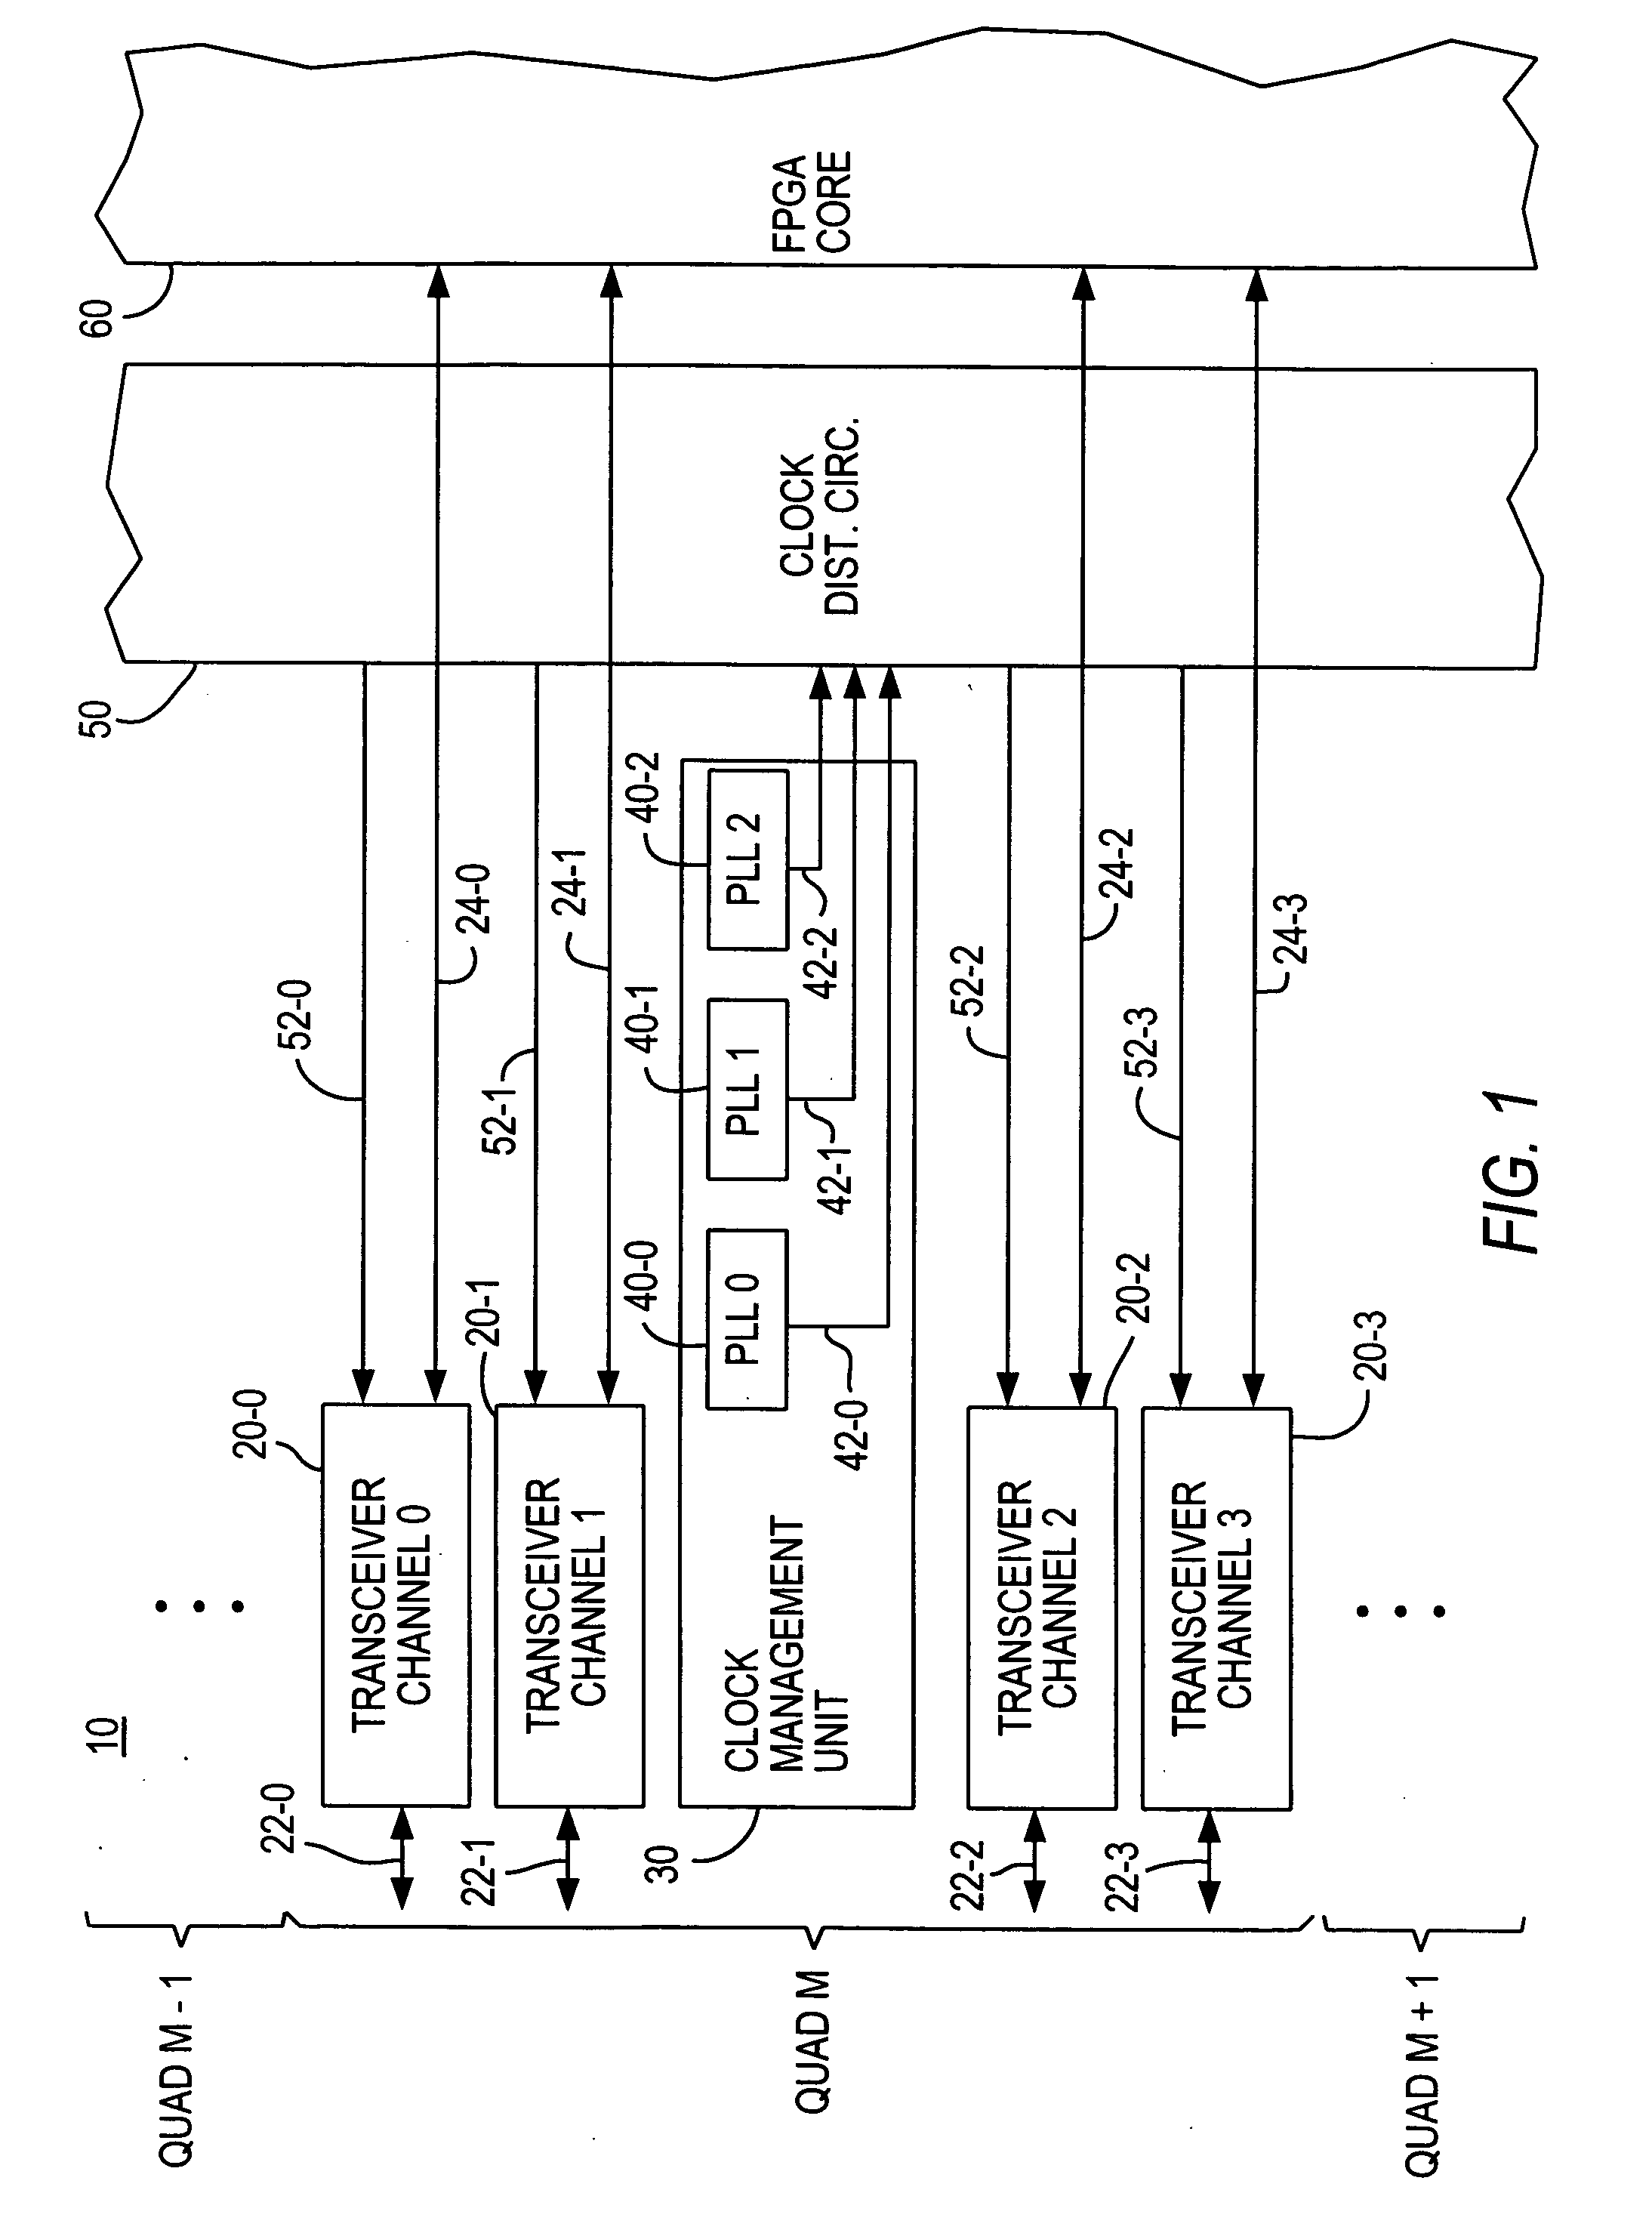 Programmable transceivers that are able to operate over wide frequency ranges